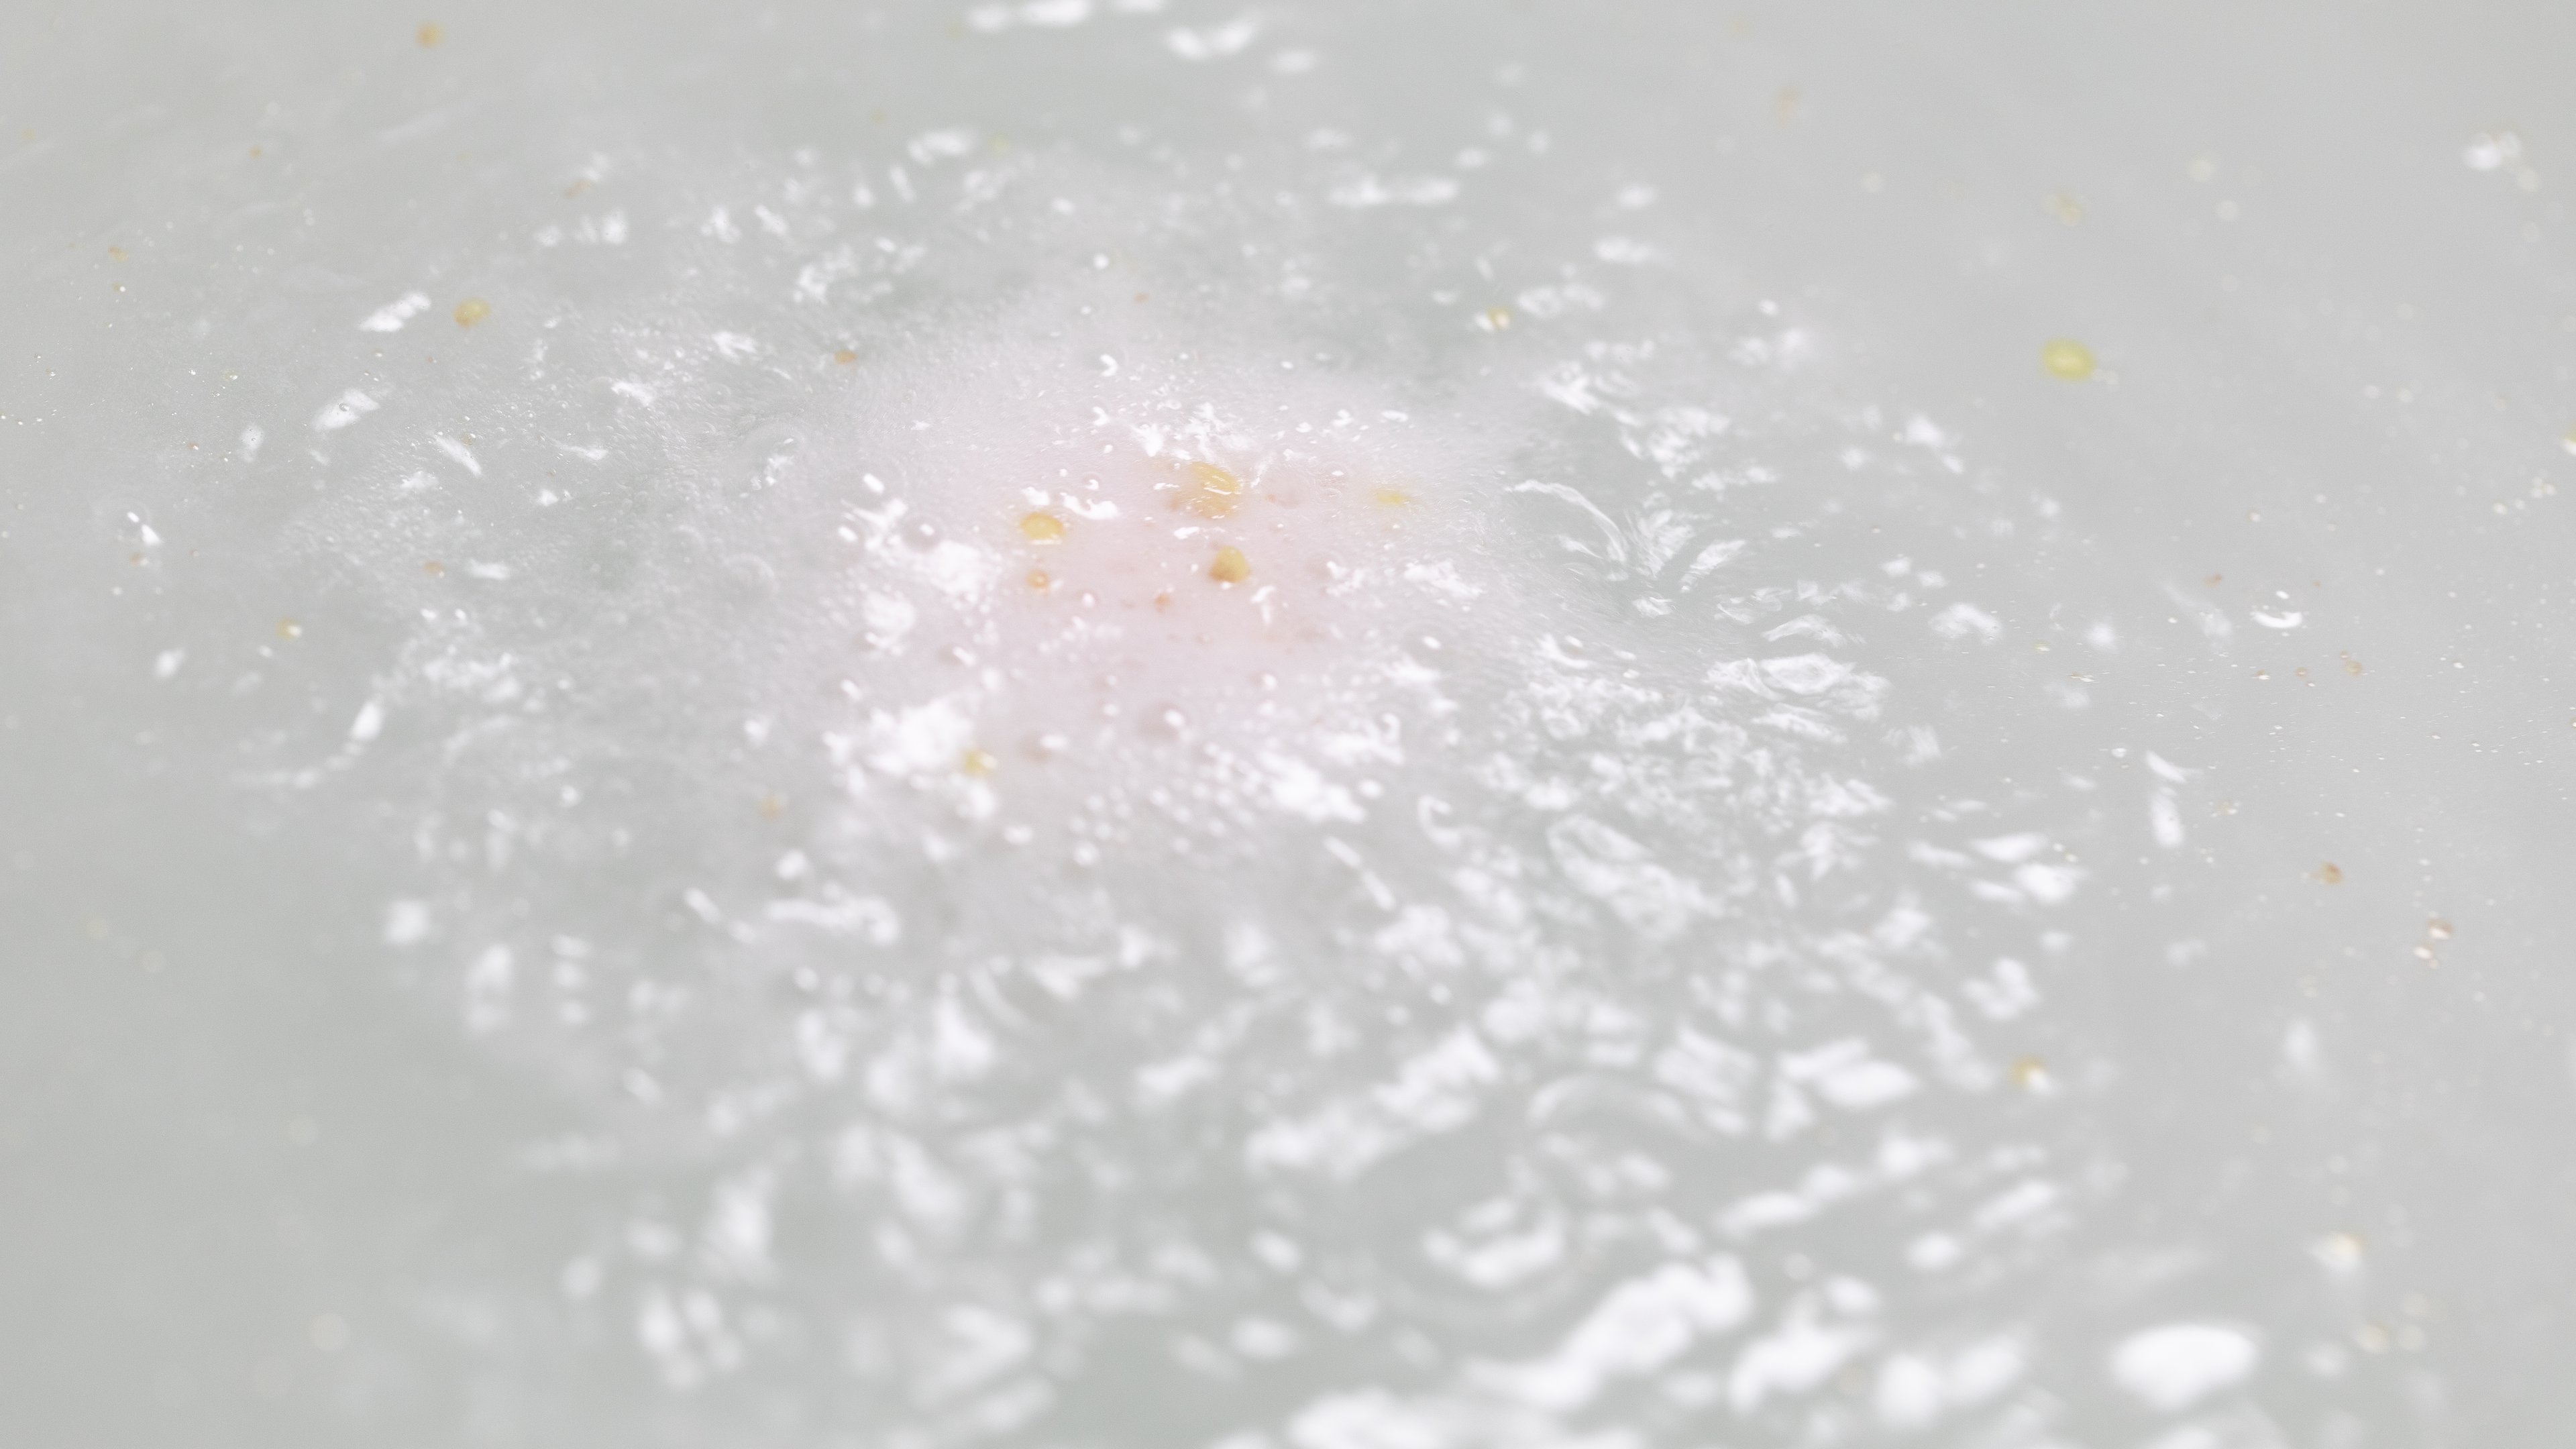 Butterball bath bomb in action, breaking down to reveal pieces of cocoa butter which float in the milky water it has created.